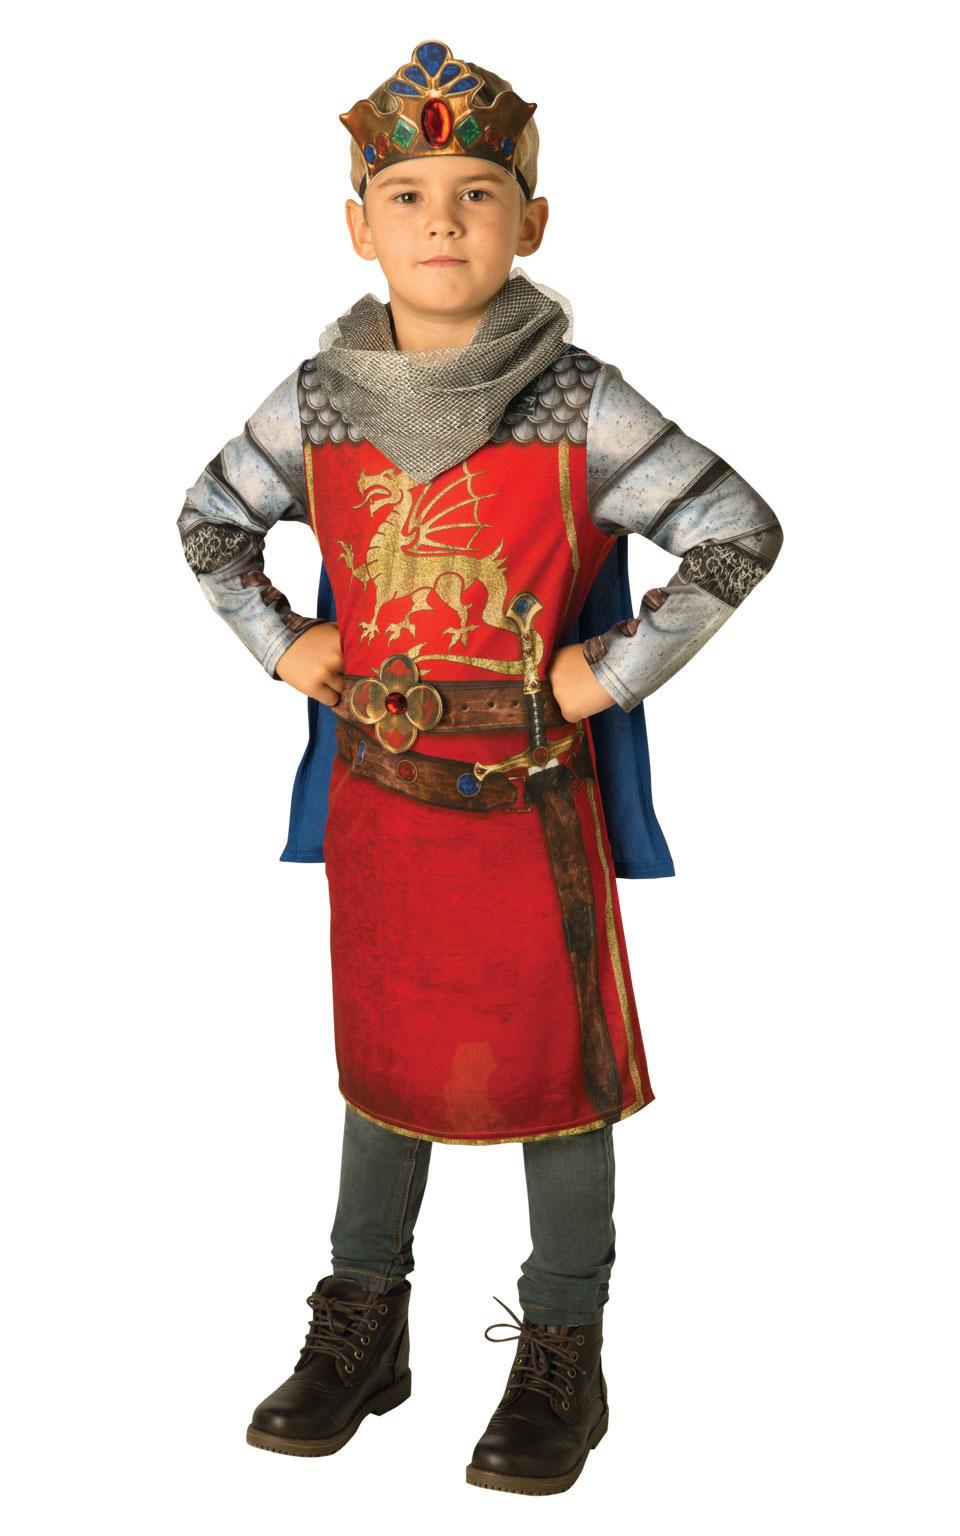 Boys King Arthur Fancy Dress Costume by Rubies 630701 available here at Karnival Costumes online party shop